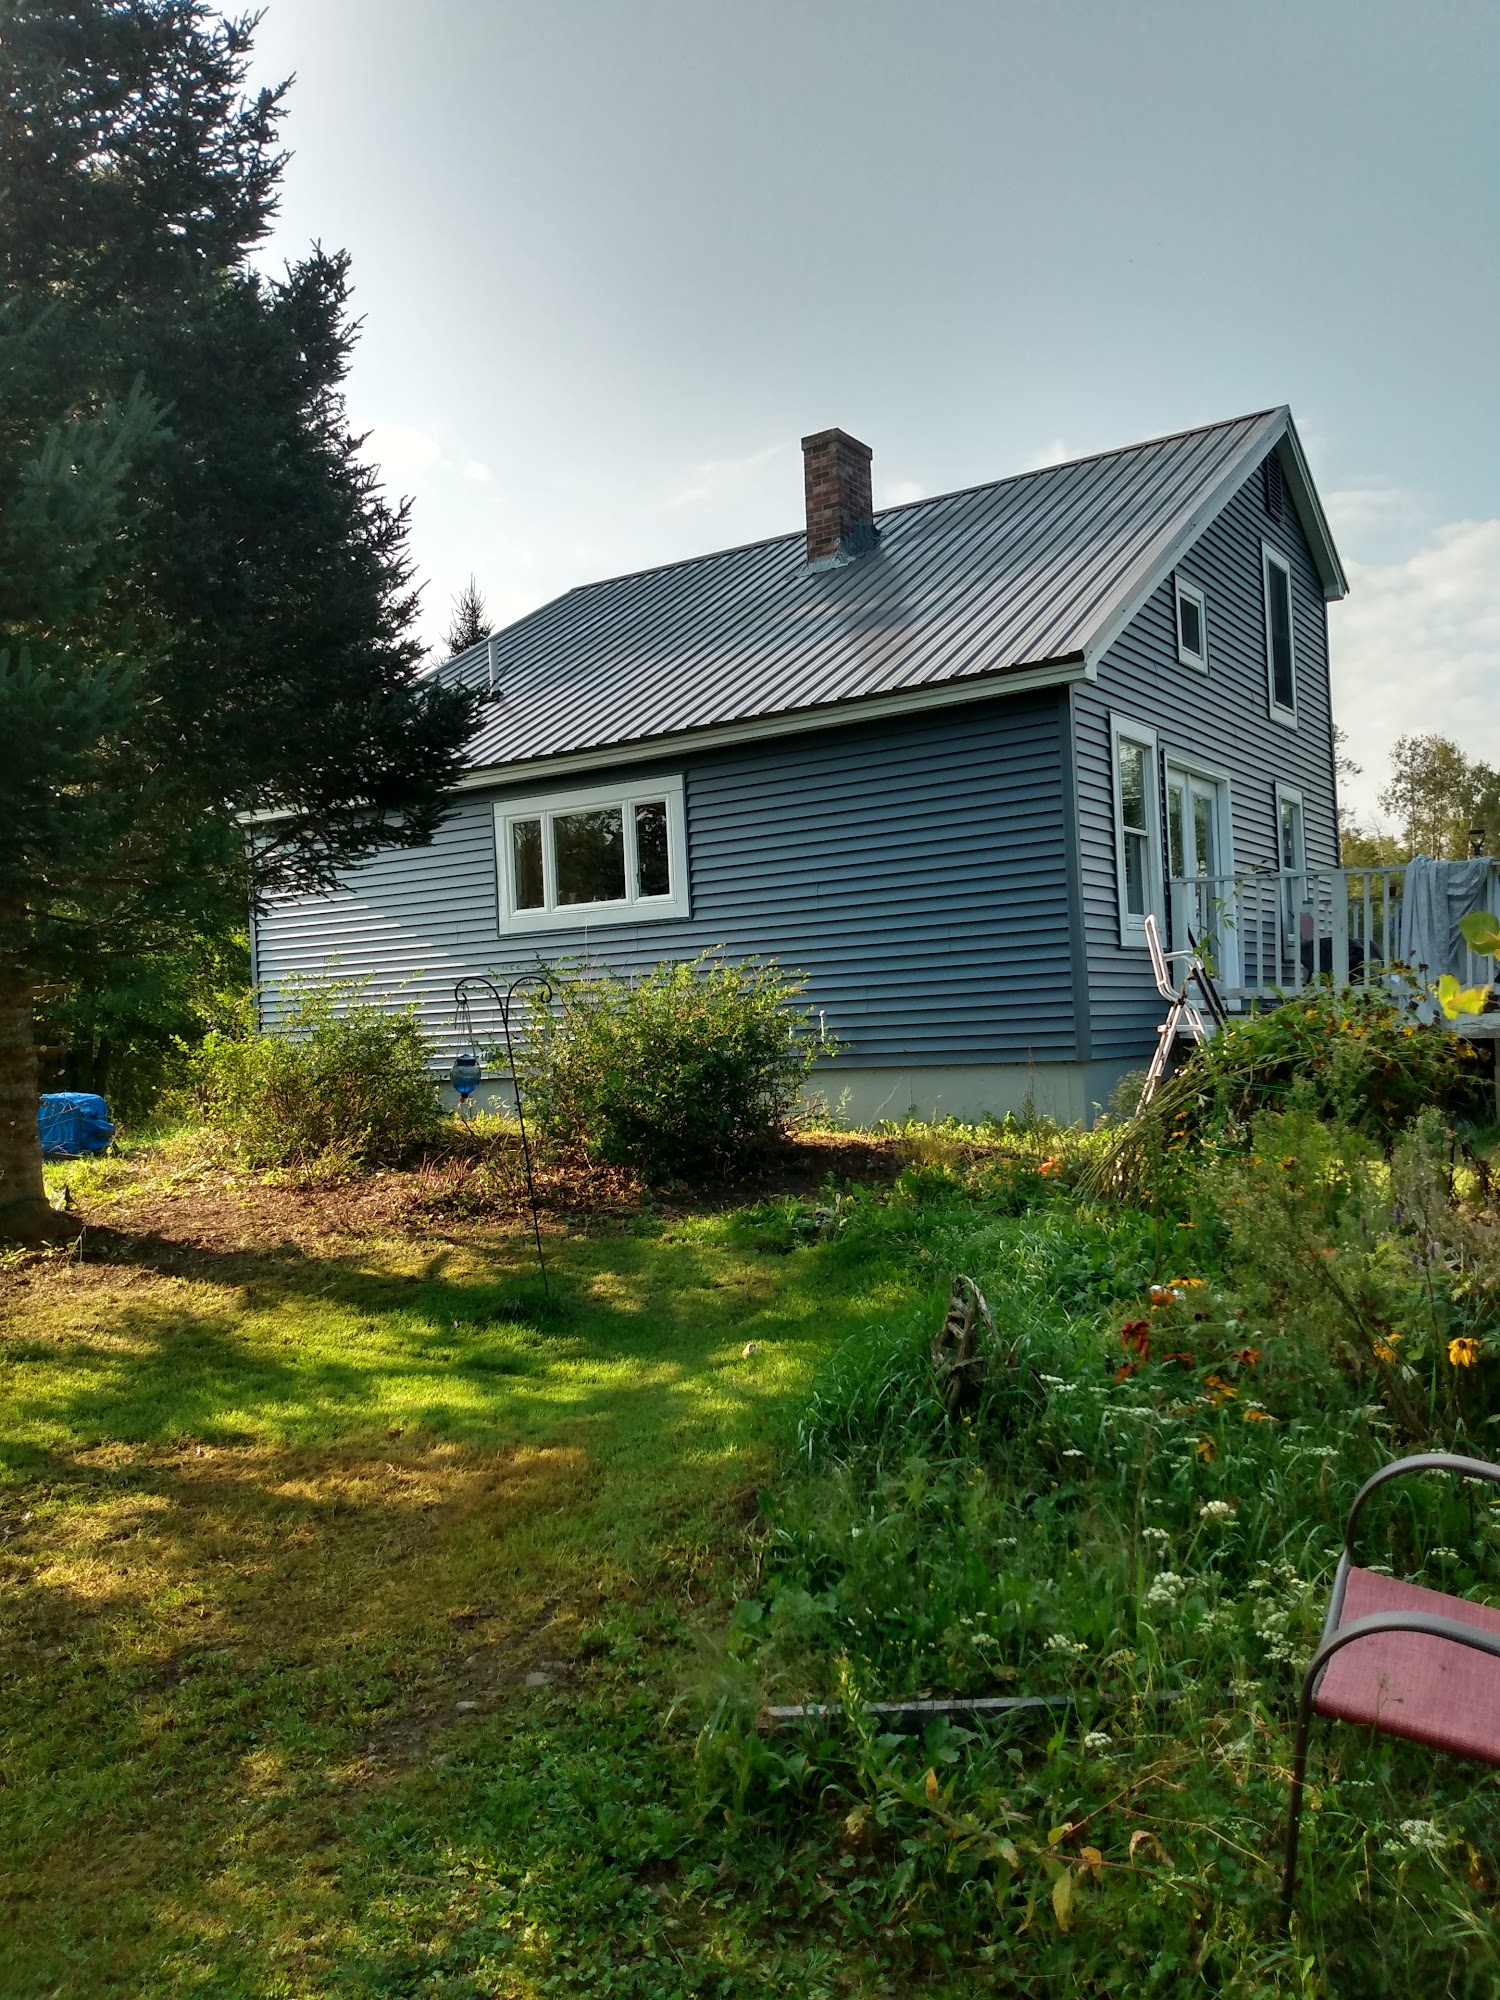 Mainely Roofing and Siding LLC Main St, Waterville Maine 04901